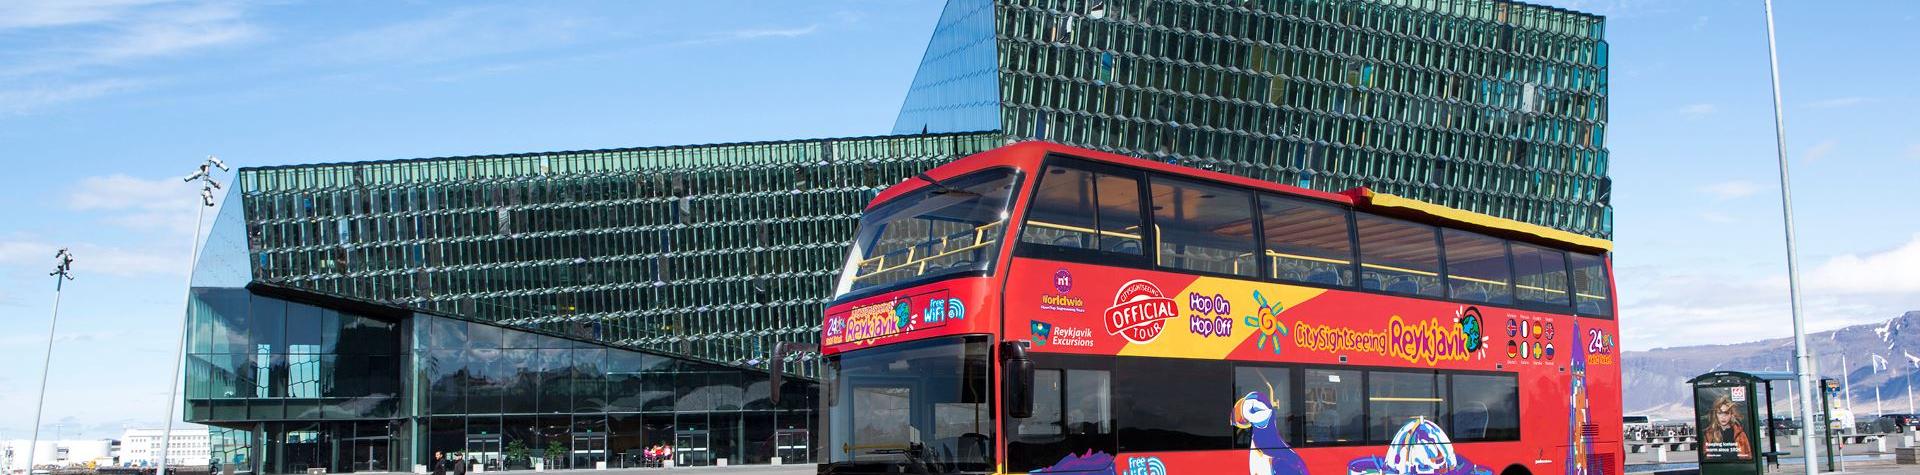 Hop On - Hop Off - City Sightseeing 48 hours